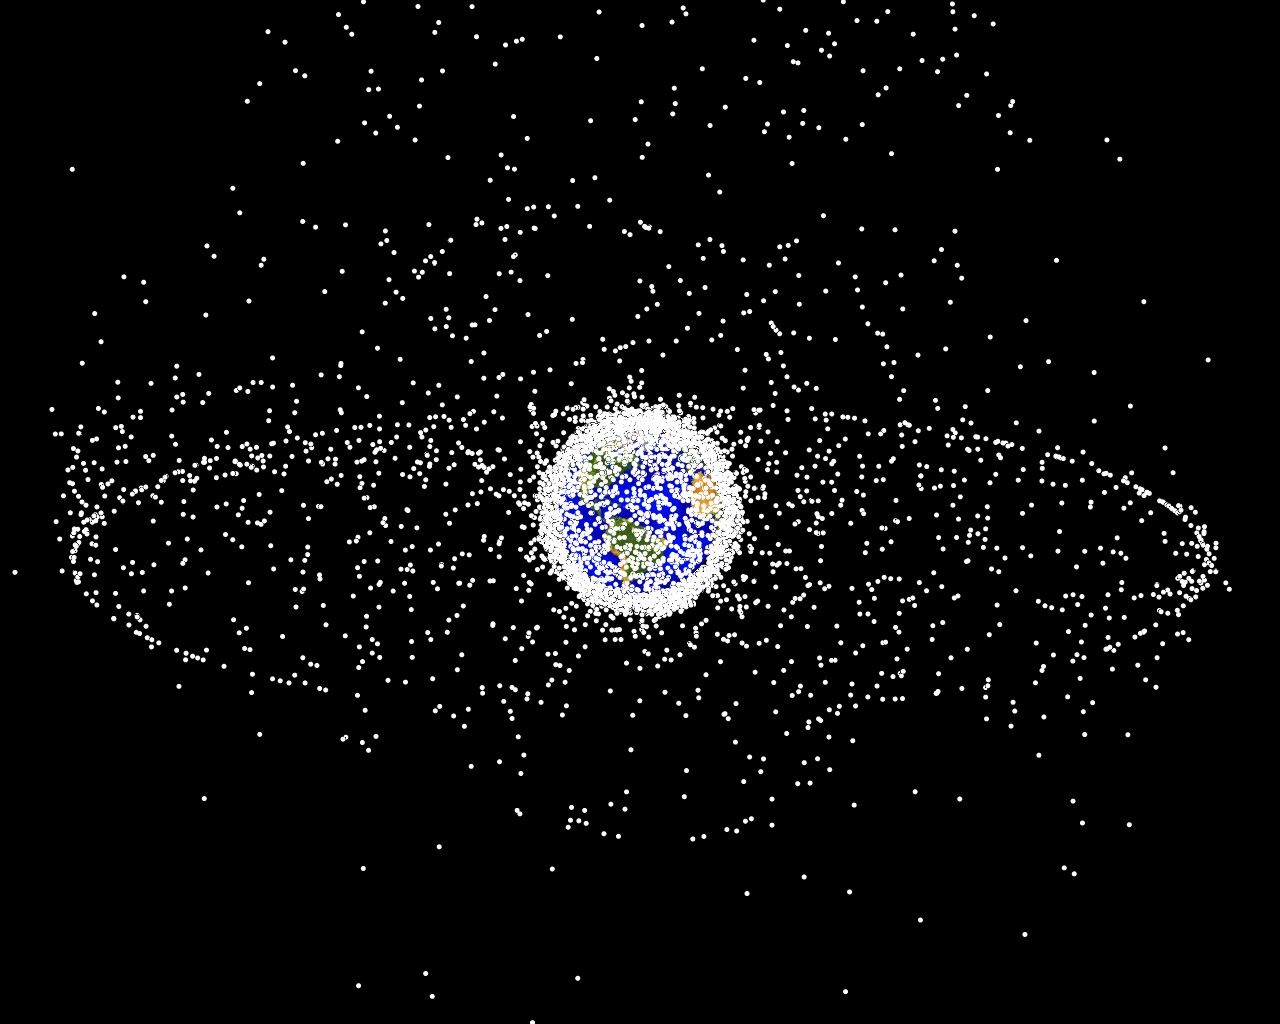 NASA plot of satellites in orbit around Earth. The ring consists of satellites at the geosynchronous distance (26,000 miles), and the dense shell of dots near Earth are satellites in low-Earth-orbit. 